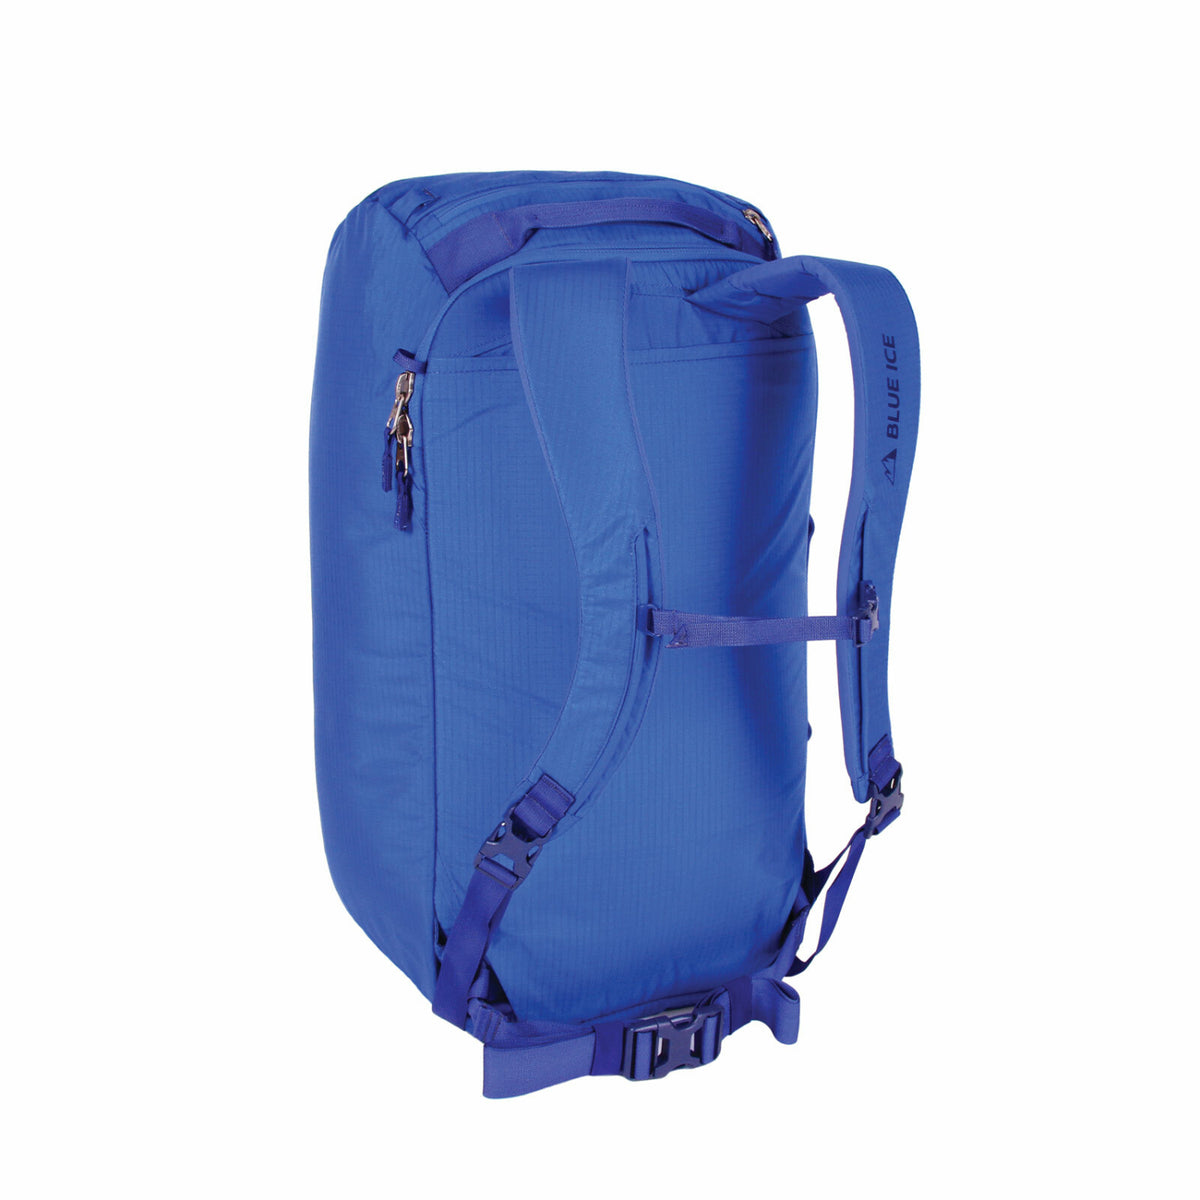 Blue Ice Octopus Climbing Pack 45L